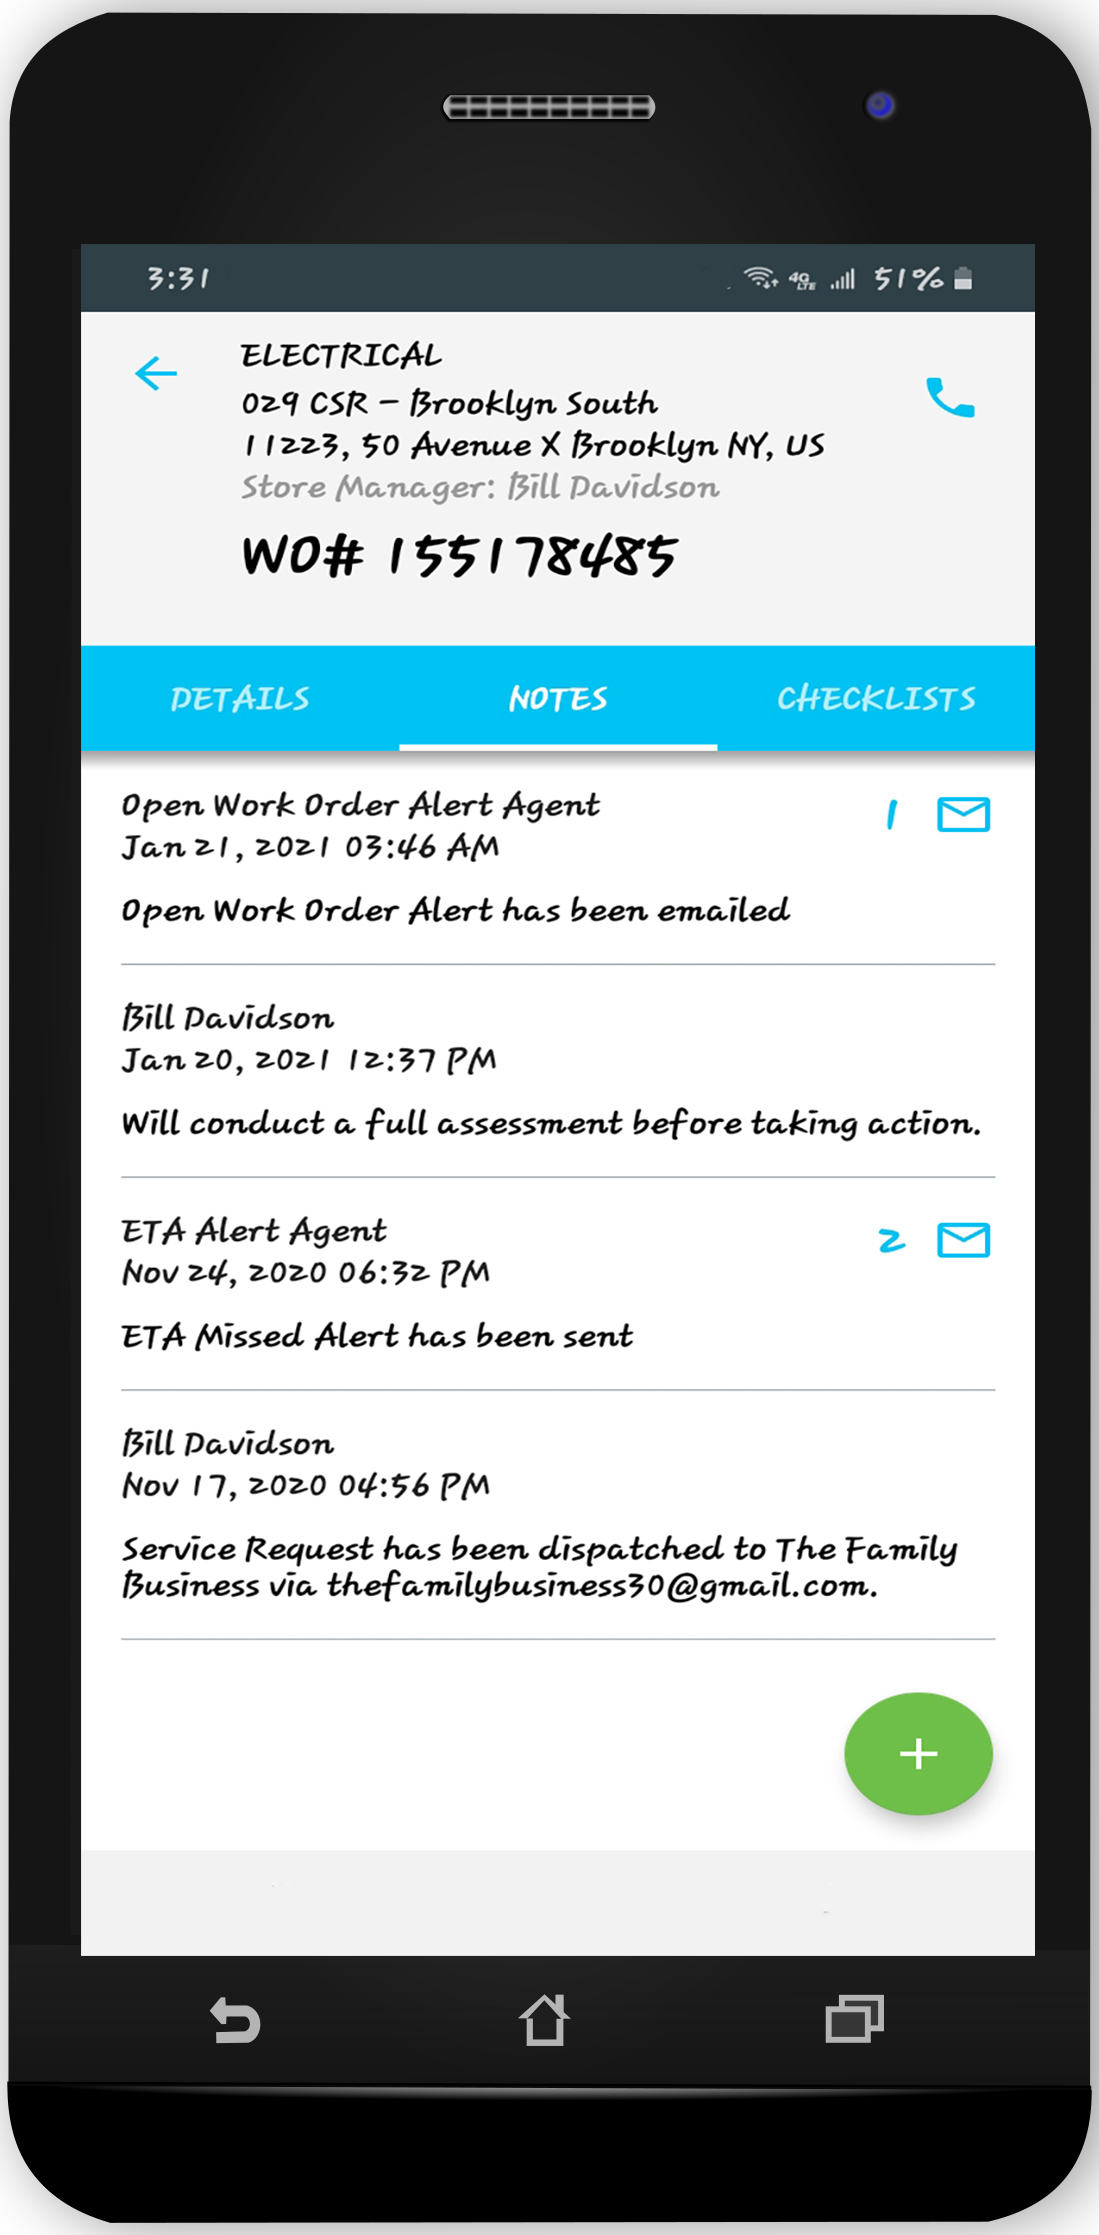 Work order notes shown from within the mobile app.